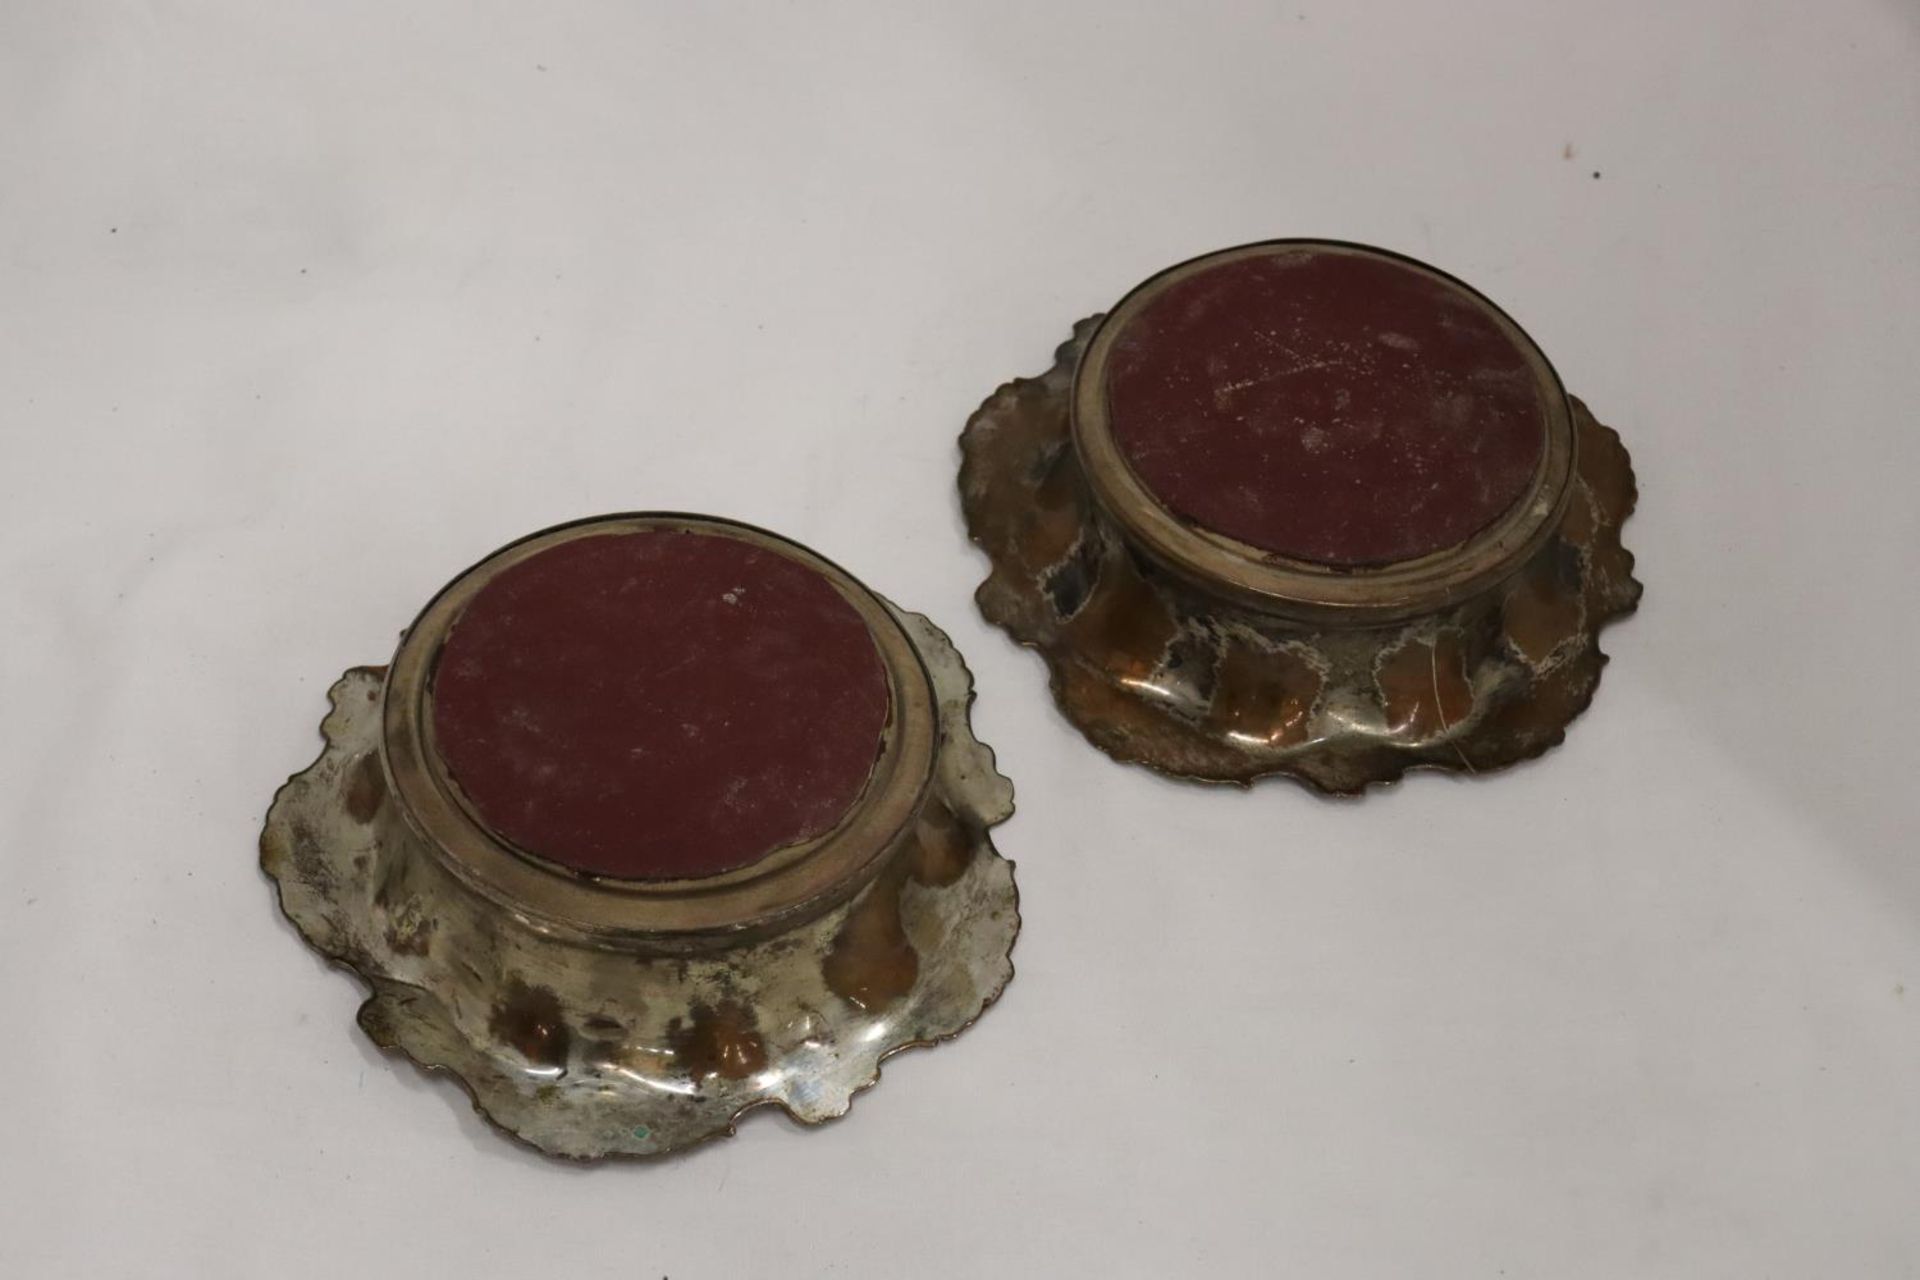 A PAIR OF VINTAGE SILVER PLATED WINE/DECANTER COASTERS EMBOSSED WITH LEAVES AND GRAPES, DIAMETER - Image 3 of 4